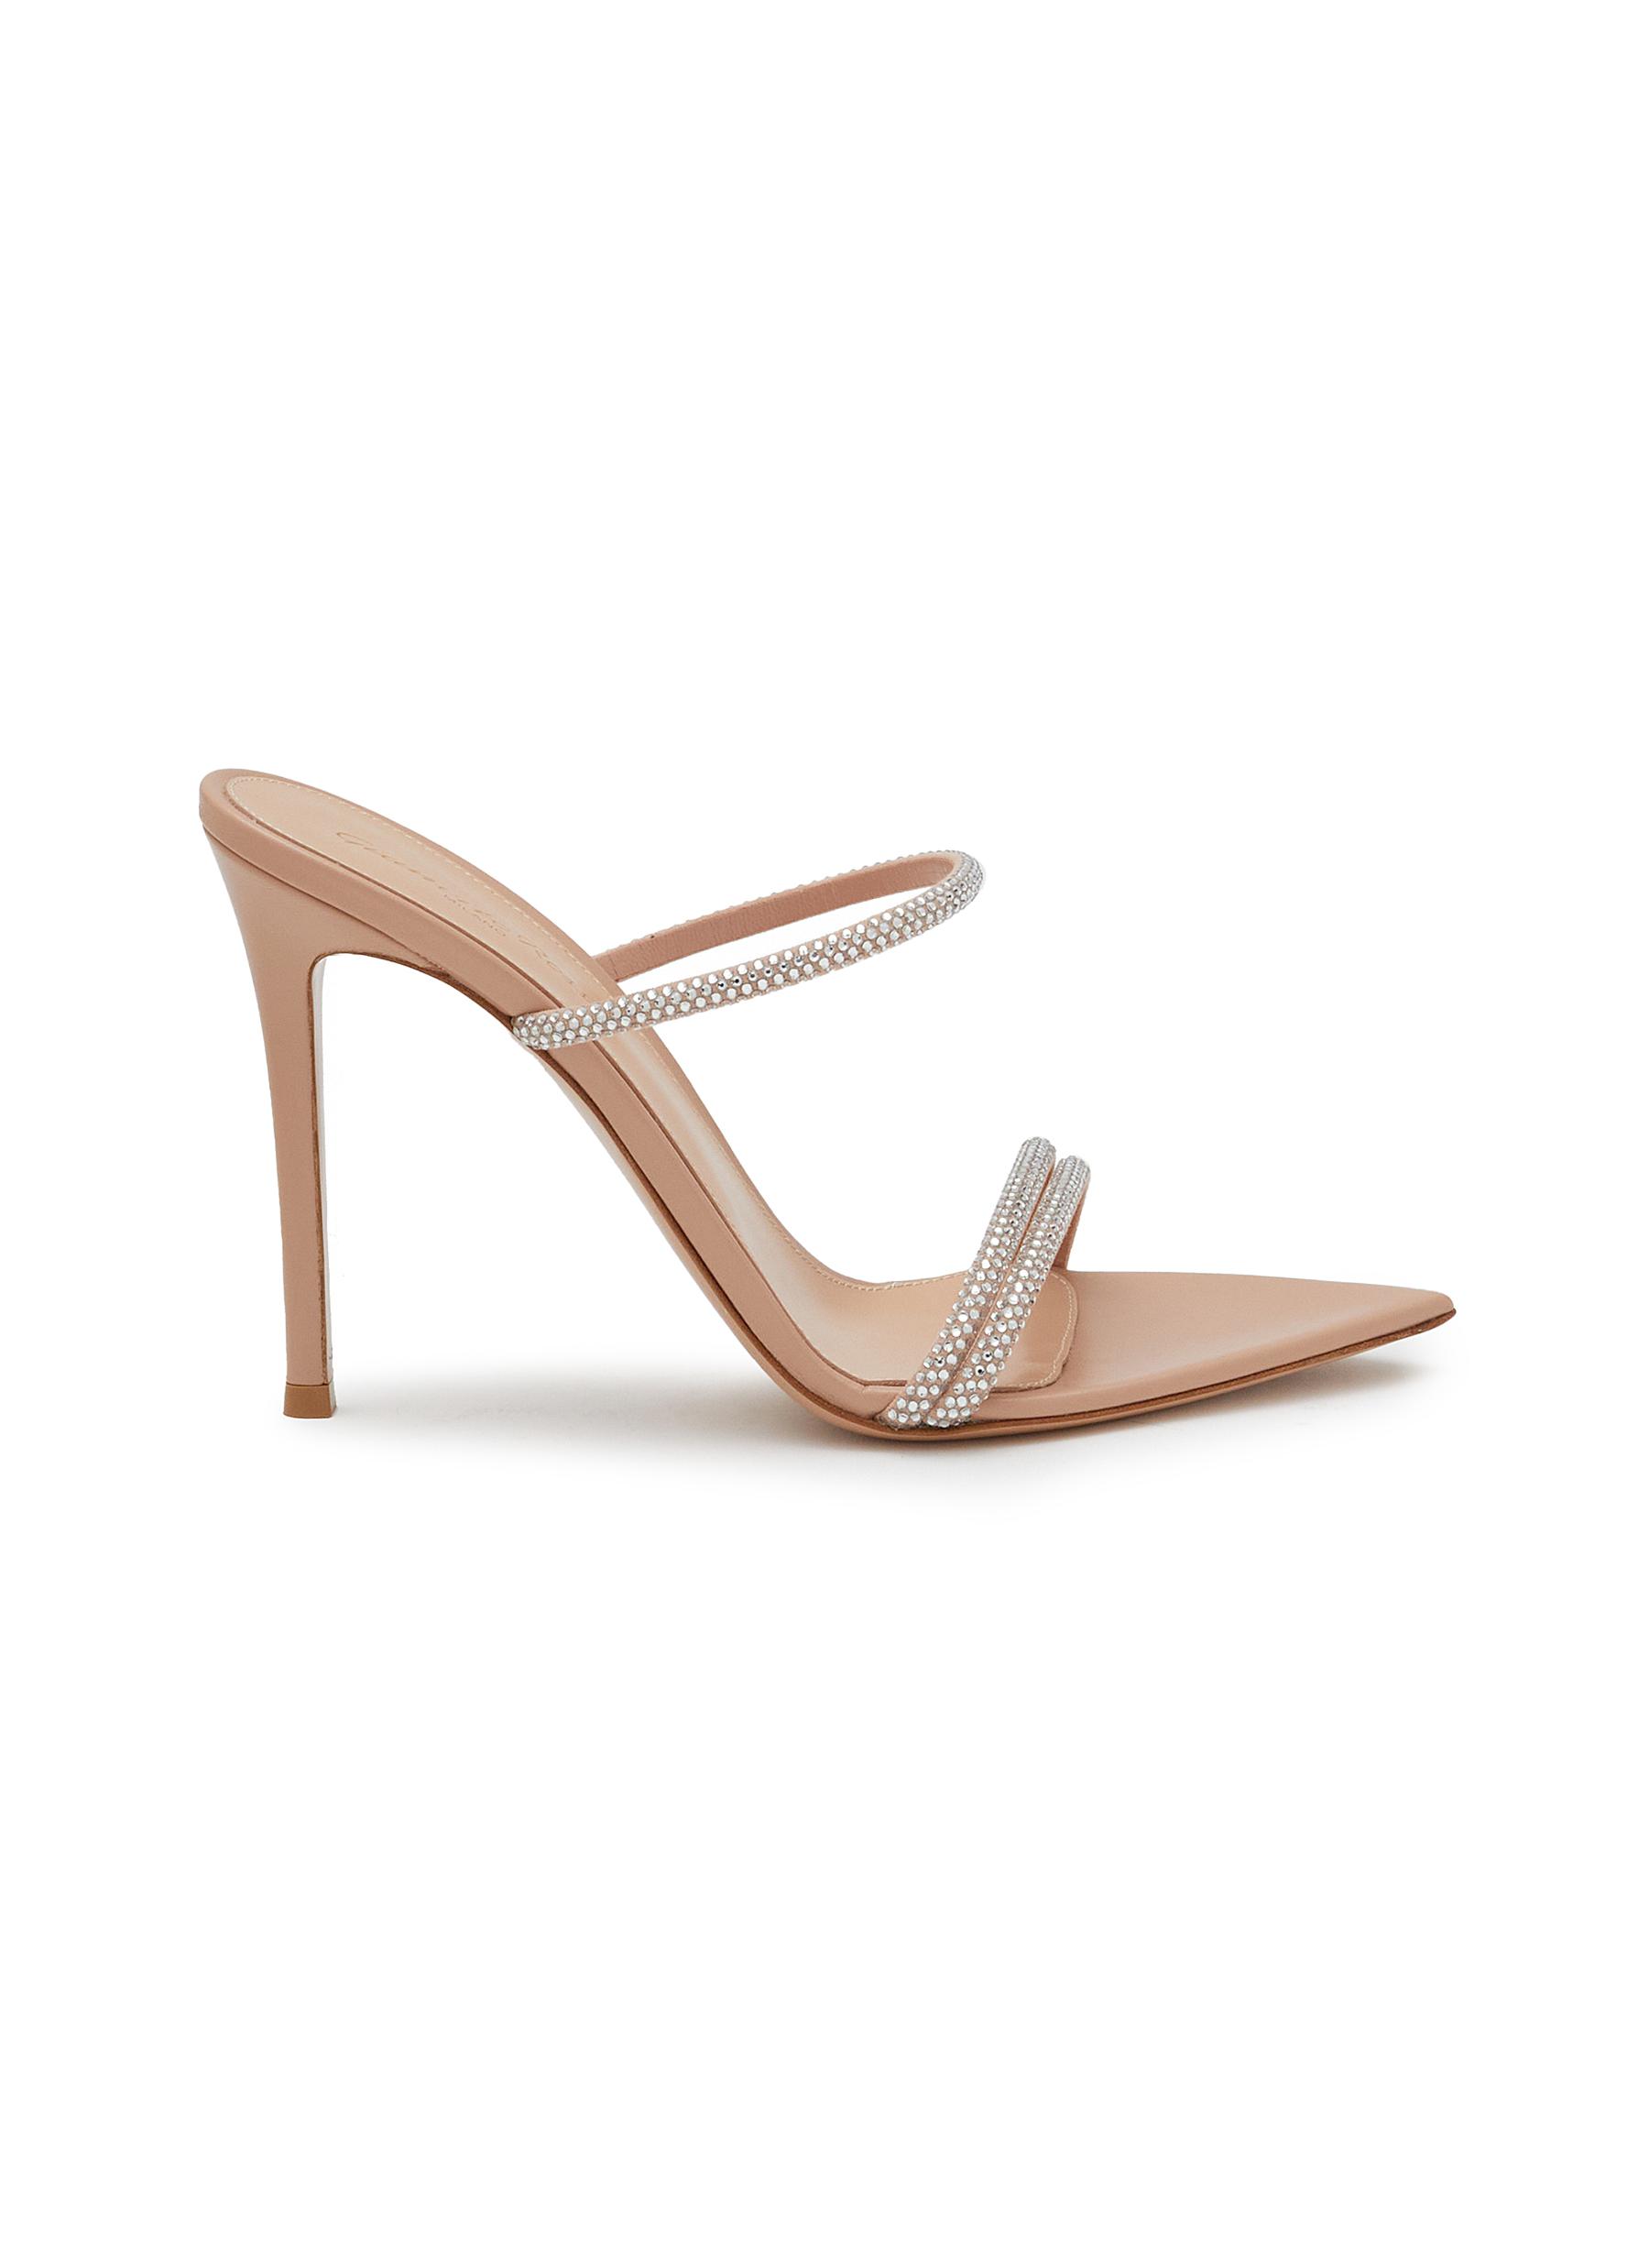 GIANVITO ROSSI | Cannes 105 Leather Sandals | Women | Lane Crawford